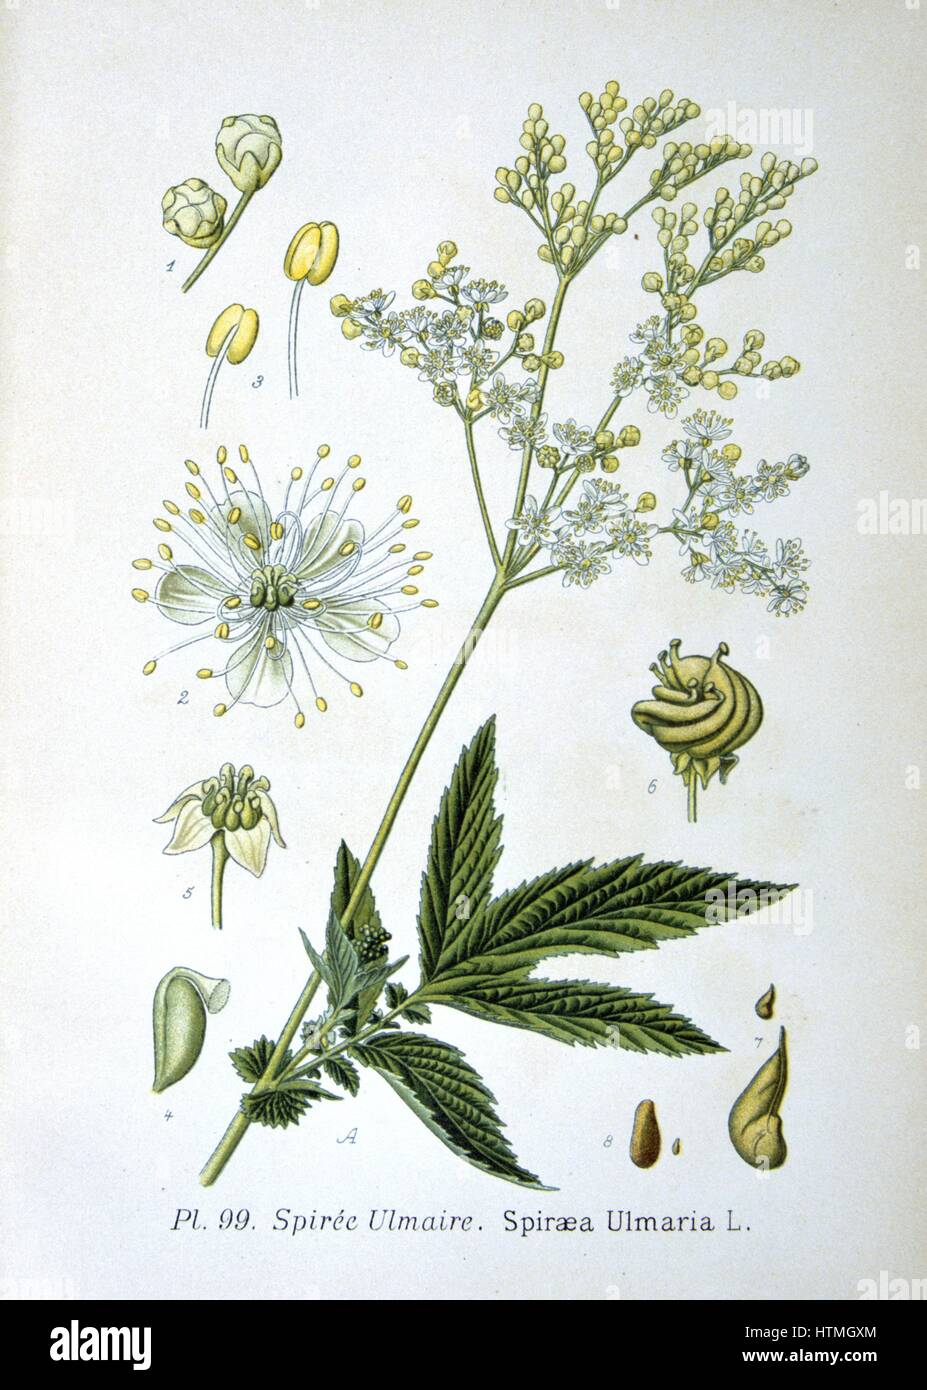 Meadowsweet (Spirea ulmaria or Filipendula ulmaria) perennial herb native of Europe and Western Asia. Used as a strewing herb (a favourite of Elizabeth I of England), a flavouring in wine and preserves, and in pot pourr. From Amedee Masclef 'Atlas des Plantes de France', Paris, 1893. Stock Photo